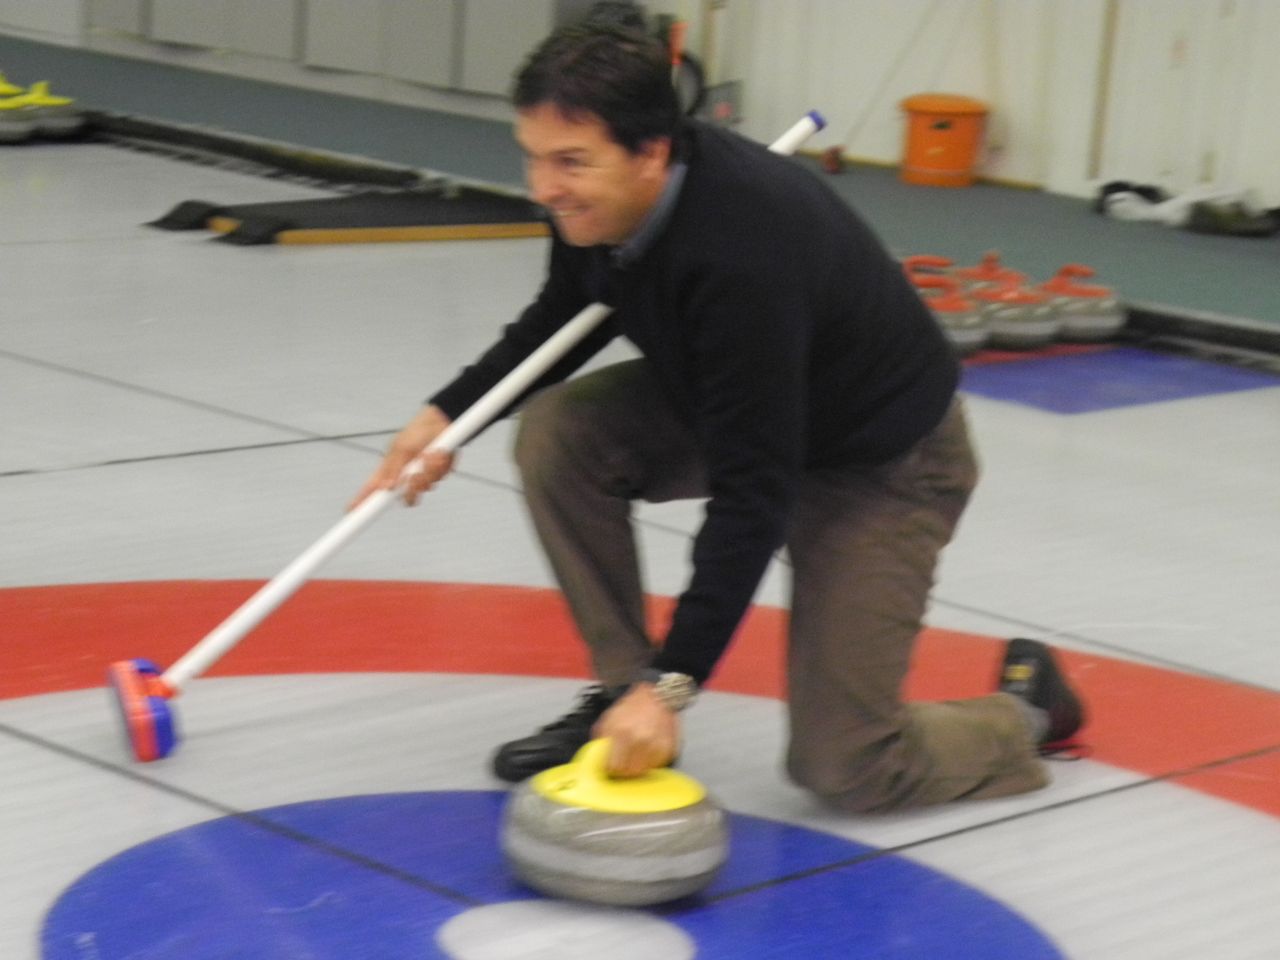 /photos/2013/S01_Curling/121011_2107-S01-MD_23.jpg